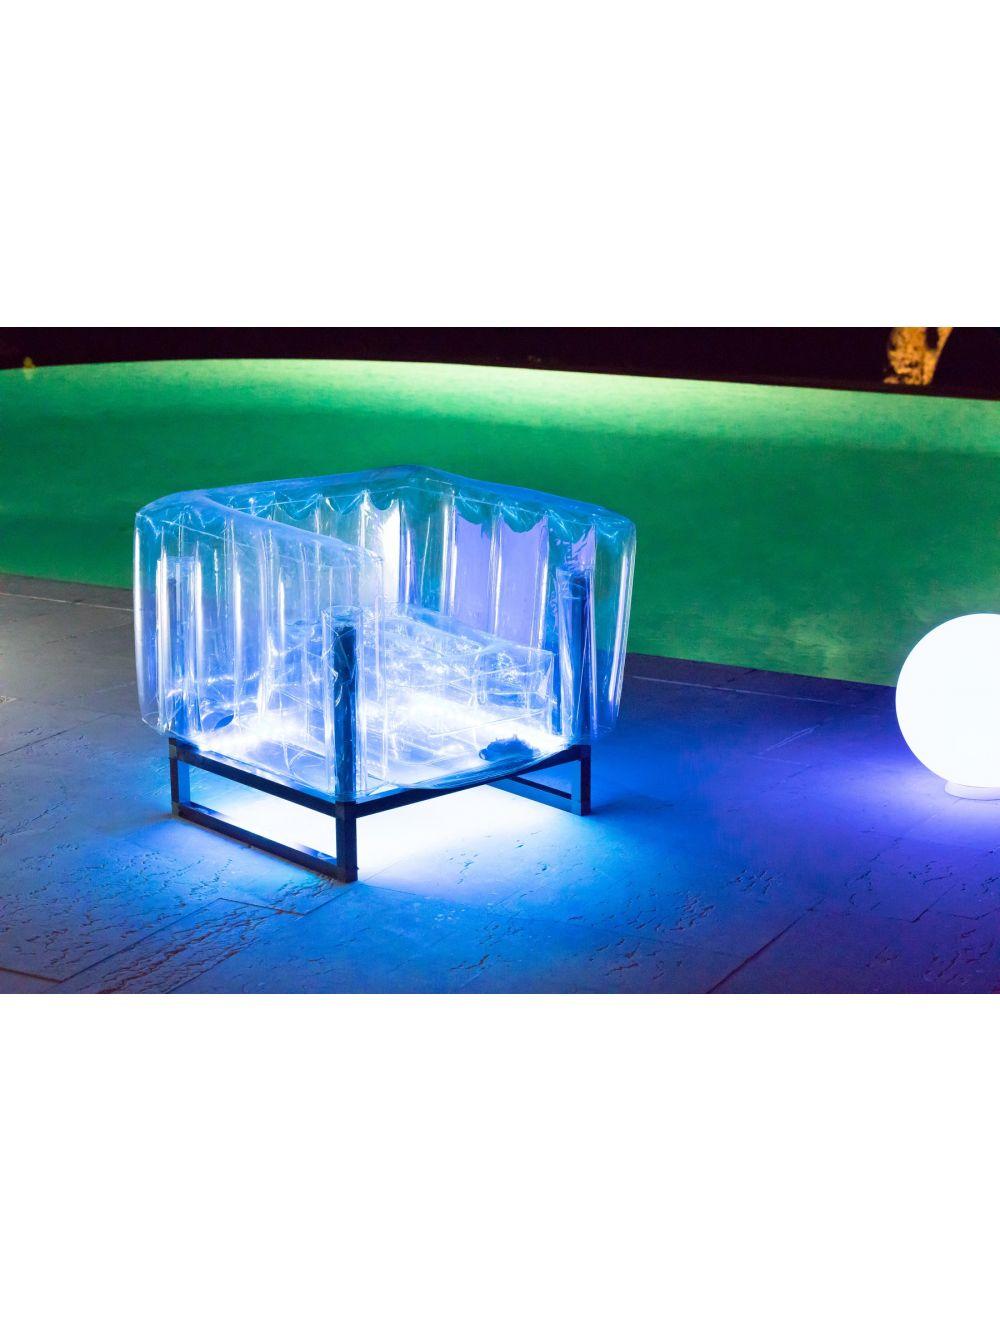 Modern Transparent Armchair Inflatable Indoor/Outdoor Chair by Yomi Eko, Made in France